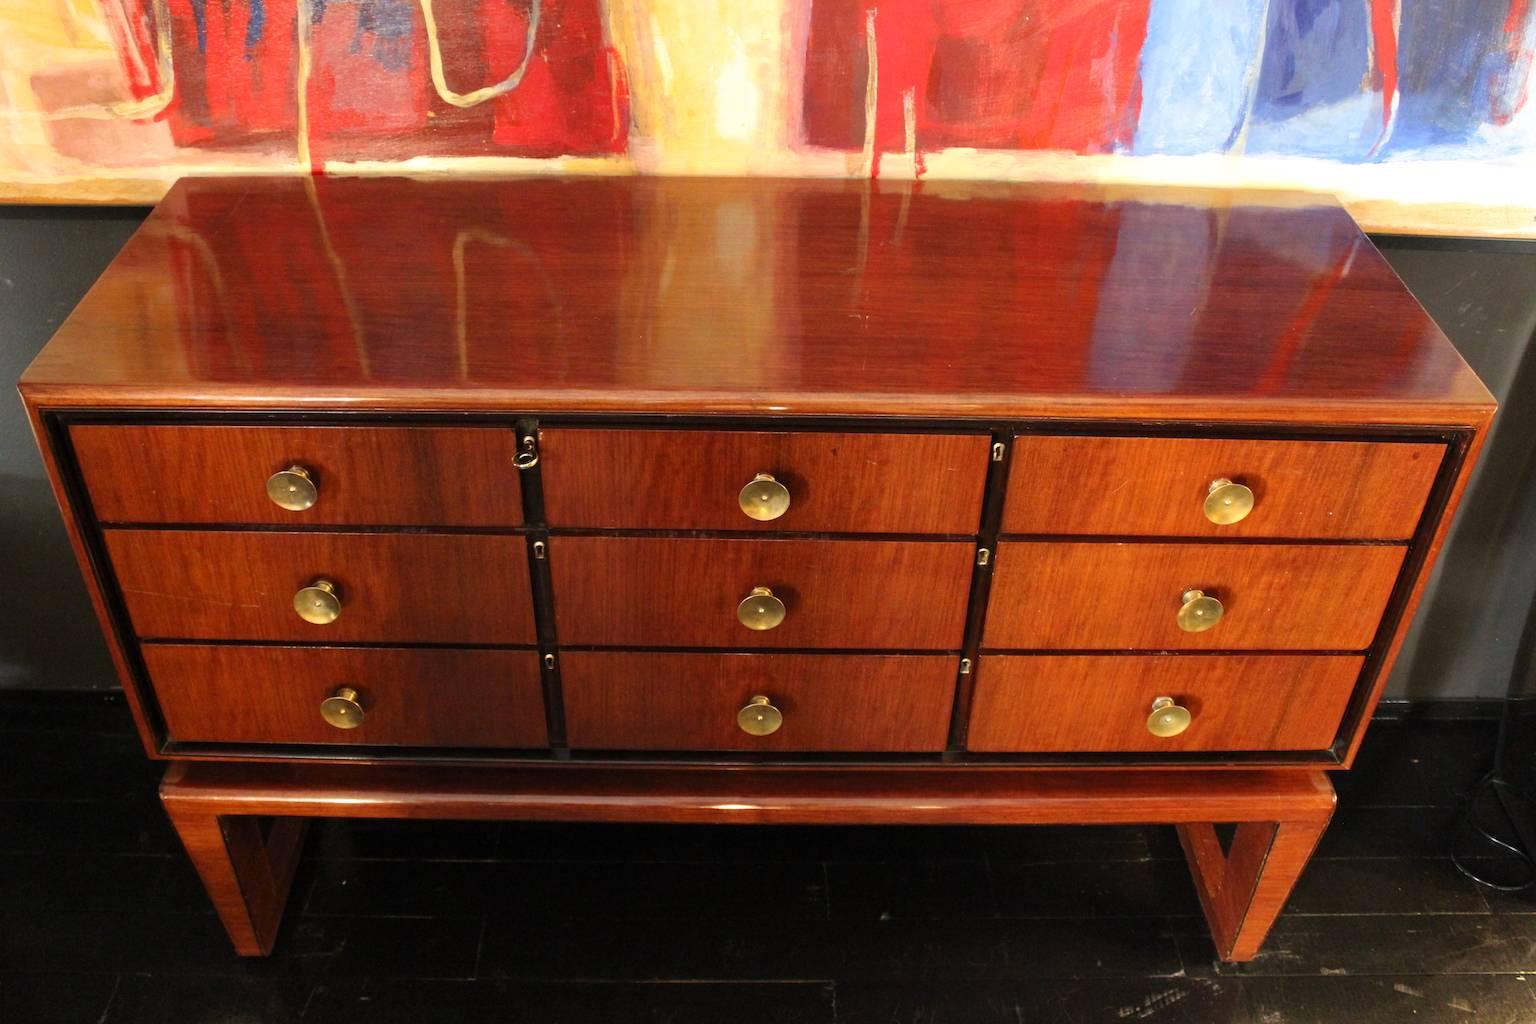 1940s Rosewood Chest of Drawers (Art déco)